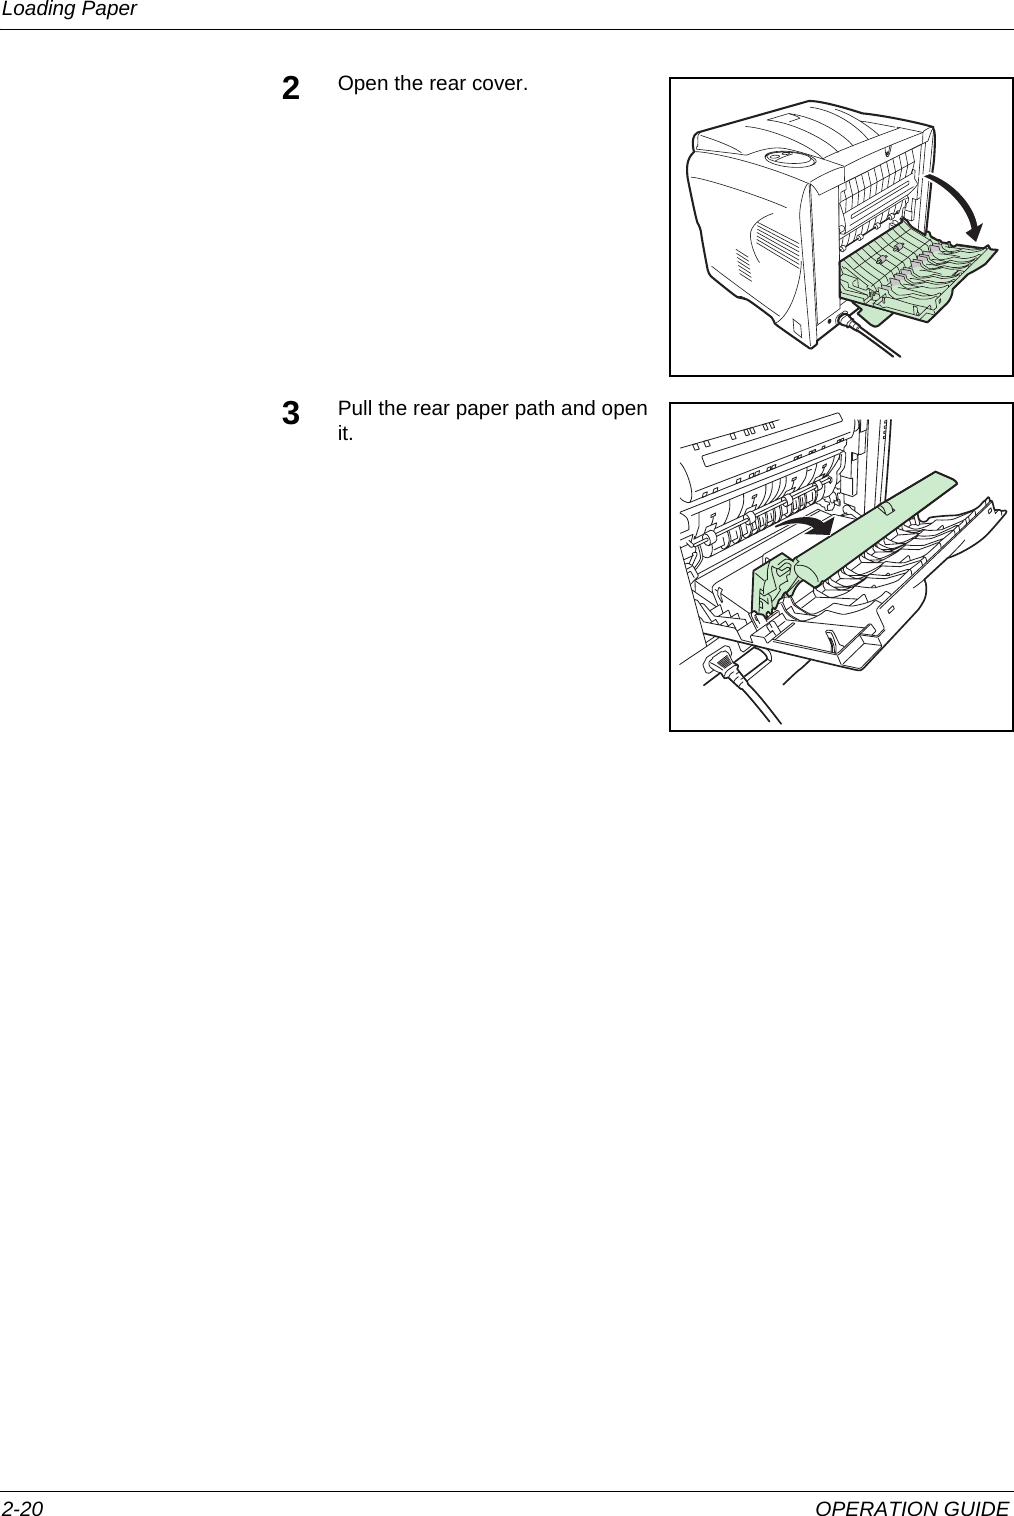 Loading Paper 2-20 OPERATION GUIDE2Open the rear cover.3Pull the rear paper path and open it.